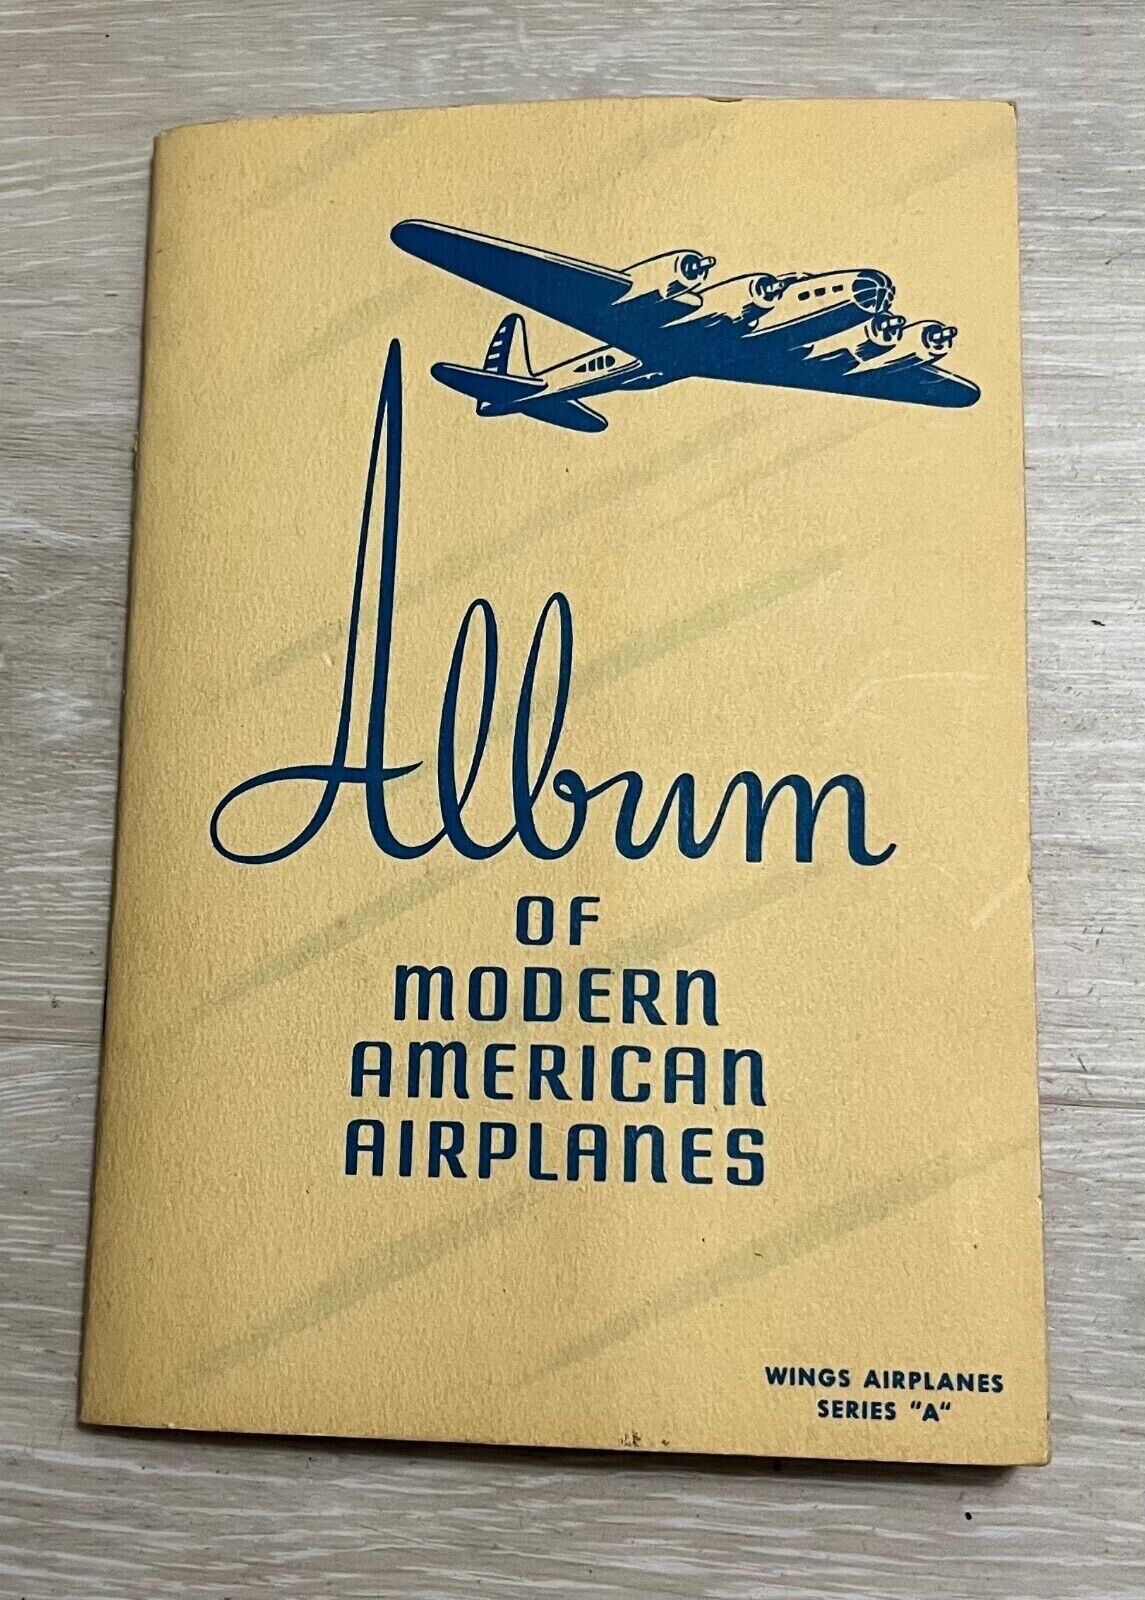 WWII Brown & Williamson Tobacco Series A Album Of Modern American Airplanes 